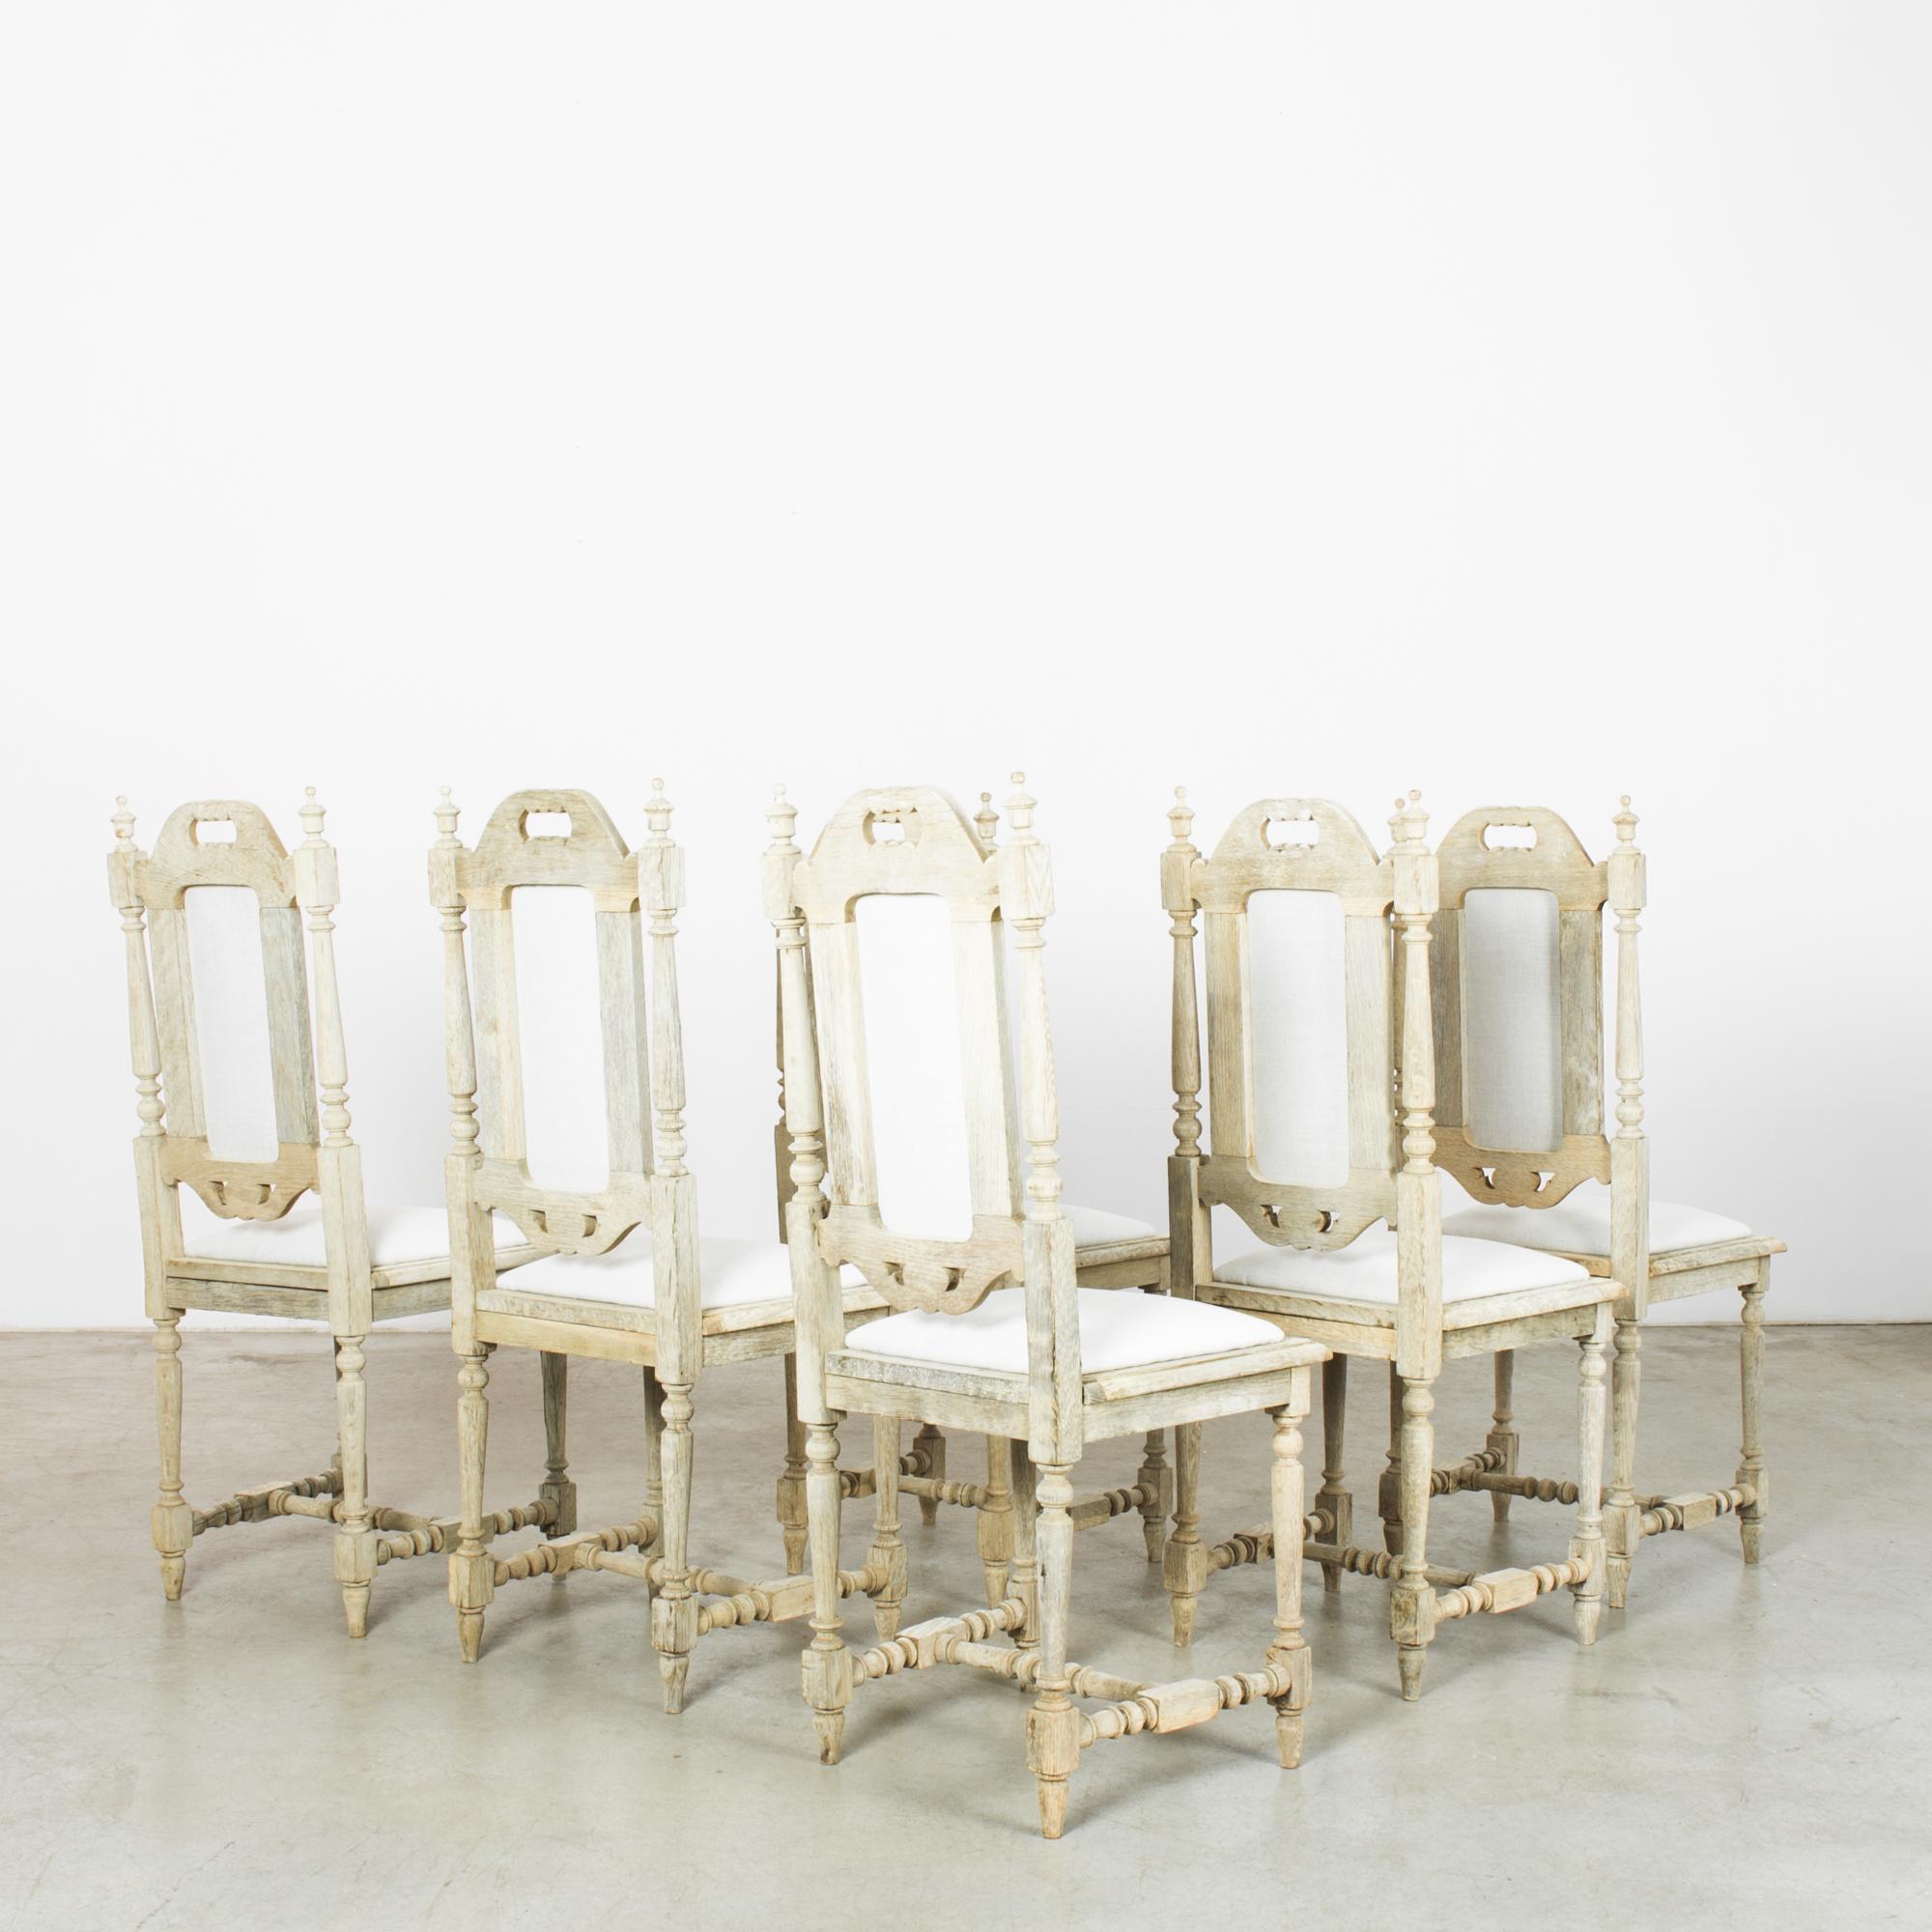 1950s Belgian Bleached Oak Chairs with Upholstered Seats and Backs, Set of Six For Sale 6